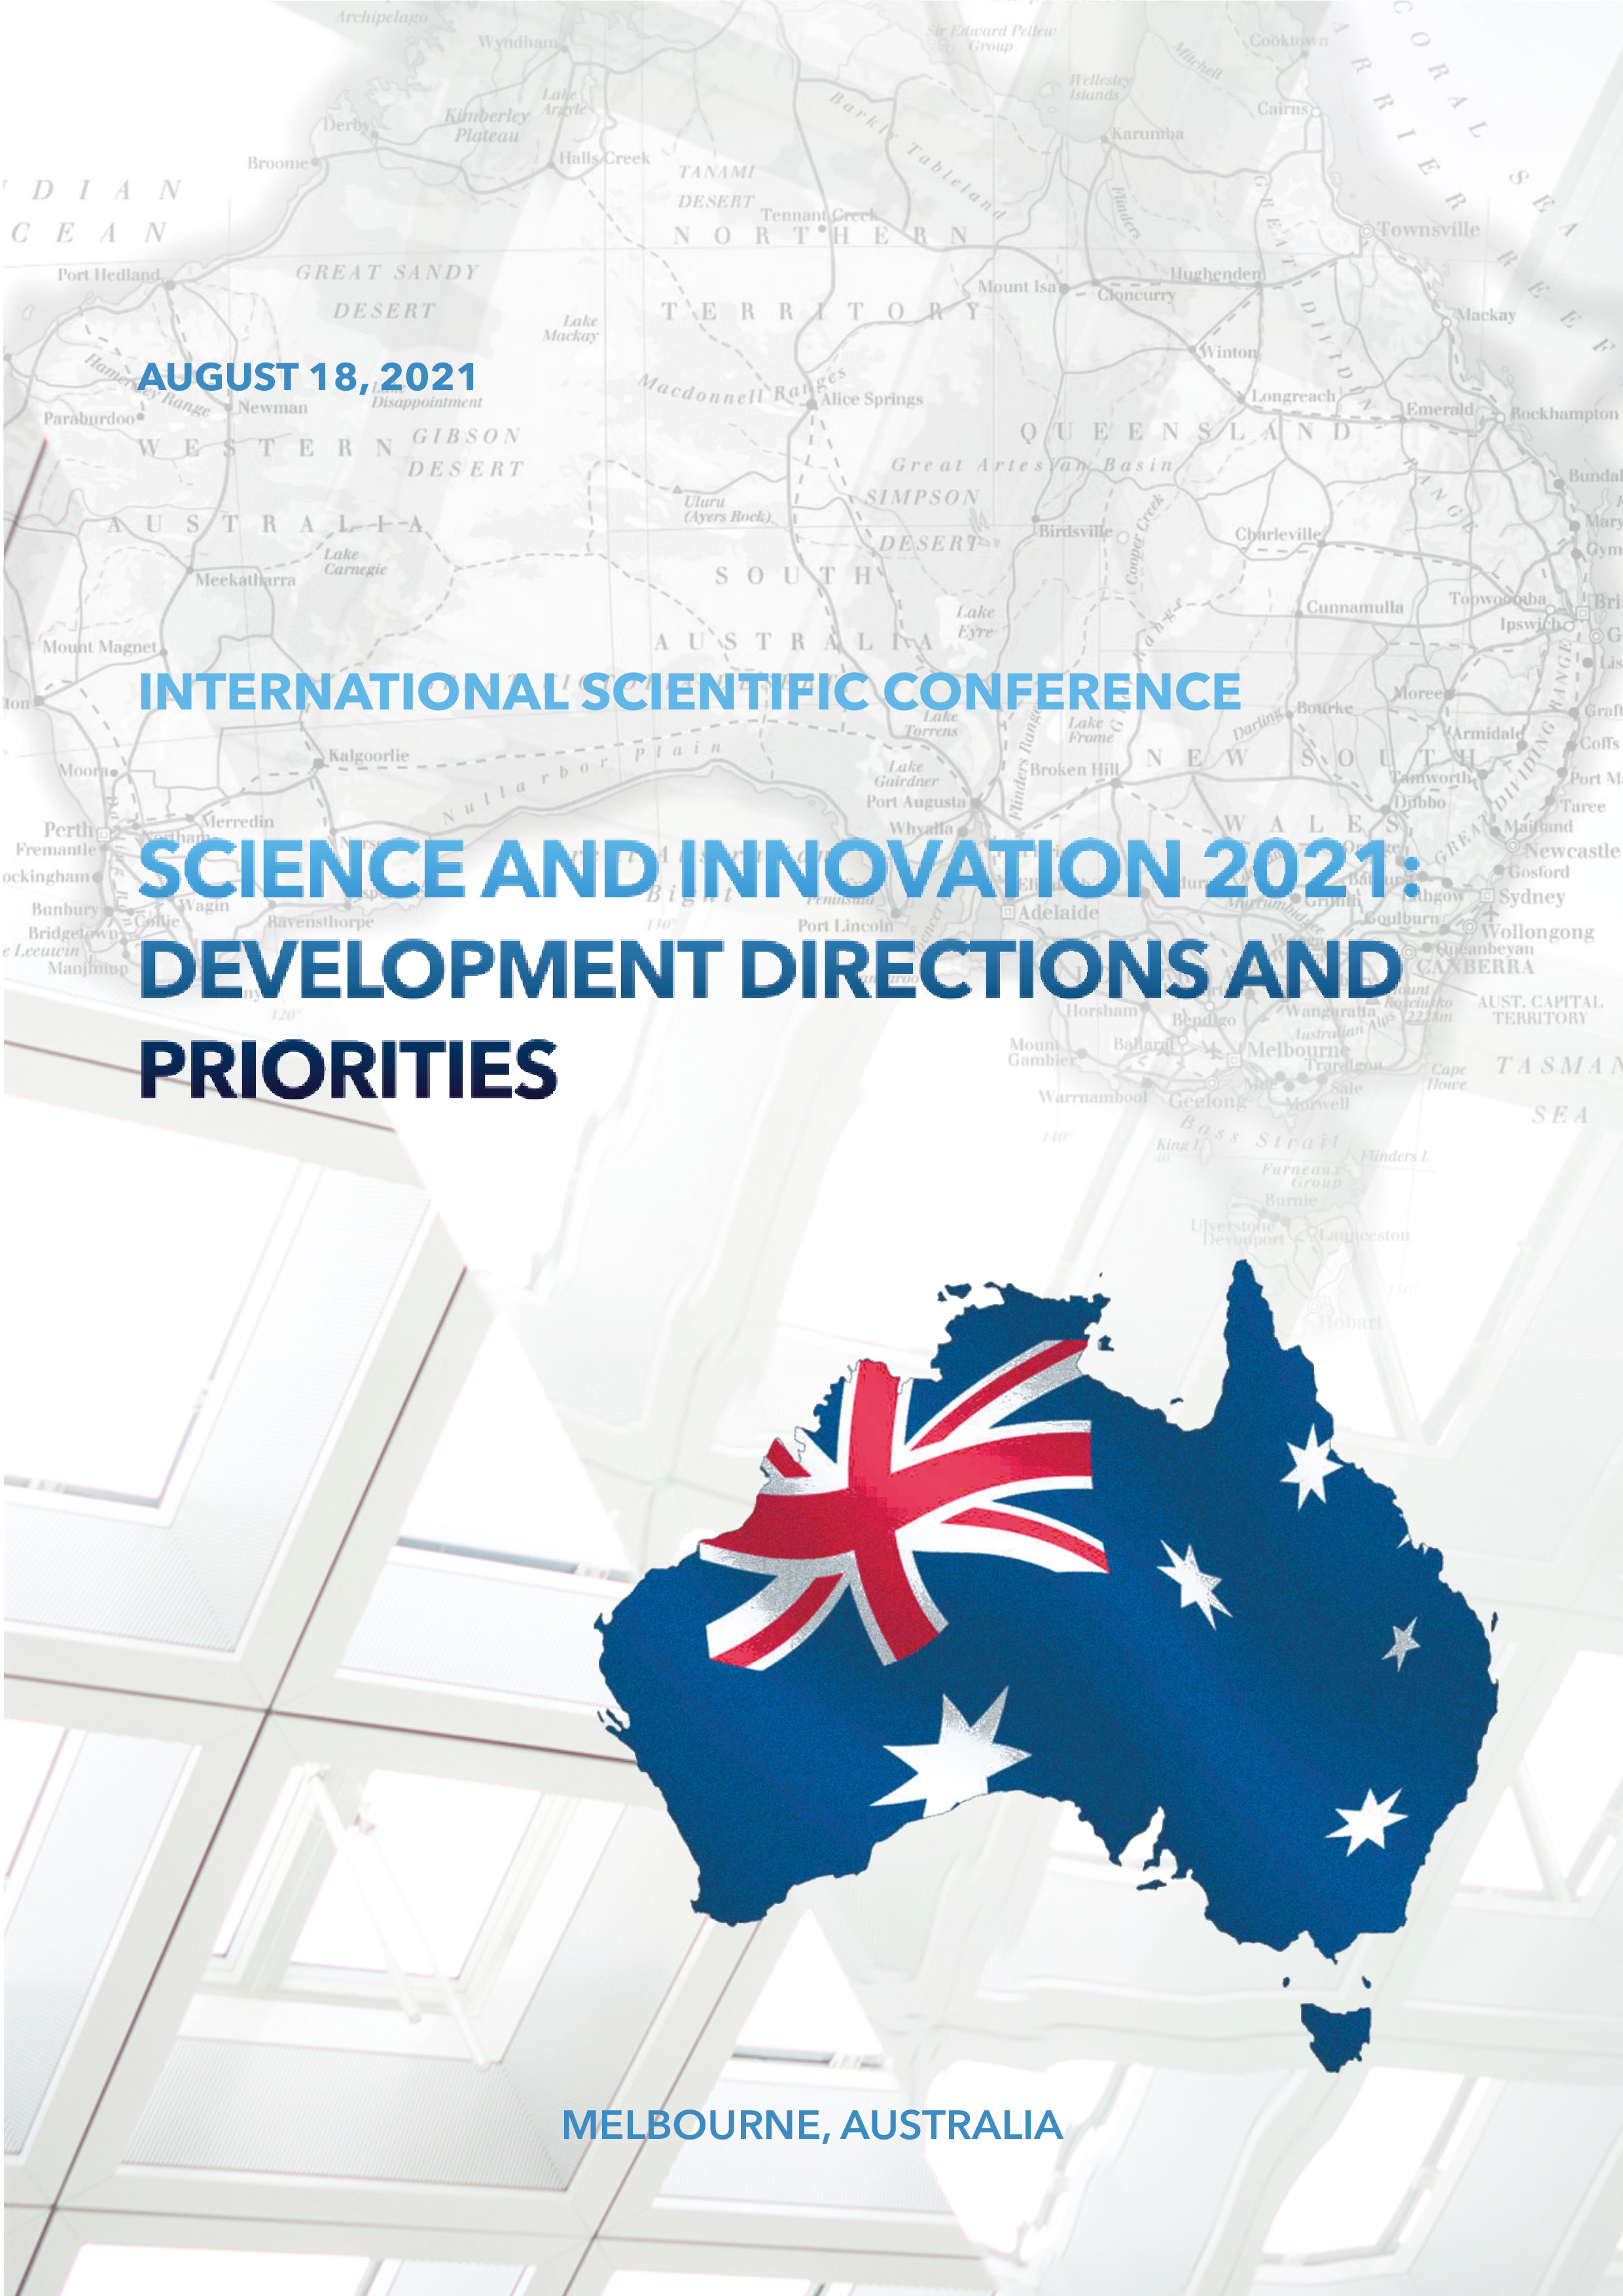                         SCIENCE AND INNOVATION 2021: DEVELOPMENT DIRECTIONS AND PRIORITIES. 21 AUGUST. MELBOURN. AUSTRALIA.
            